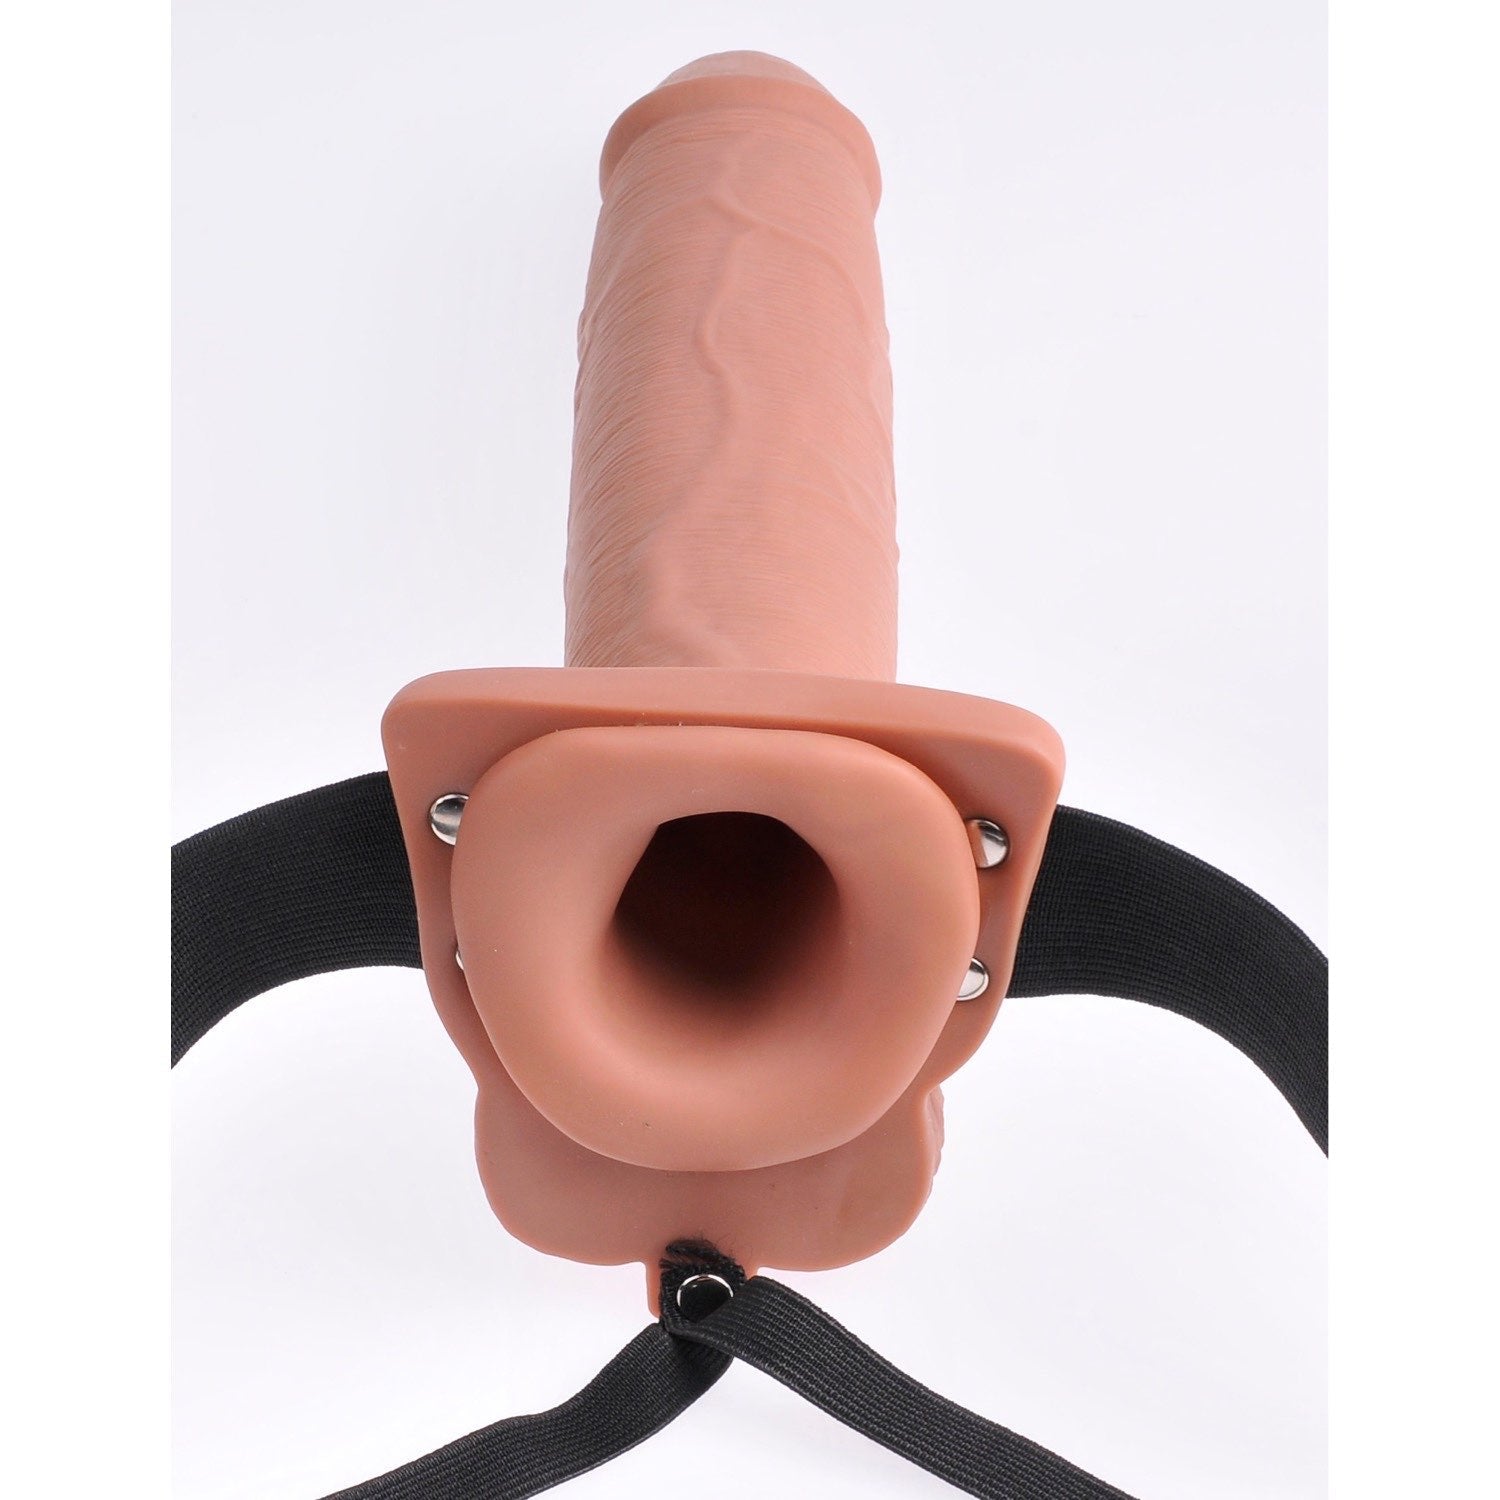 Fetish Fantasy FFS 10IN Hollow Rech Strap-On by Pipedream